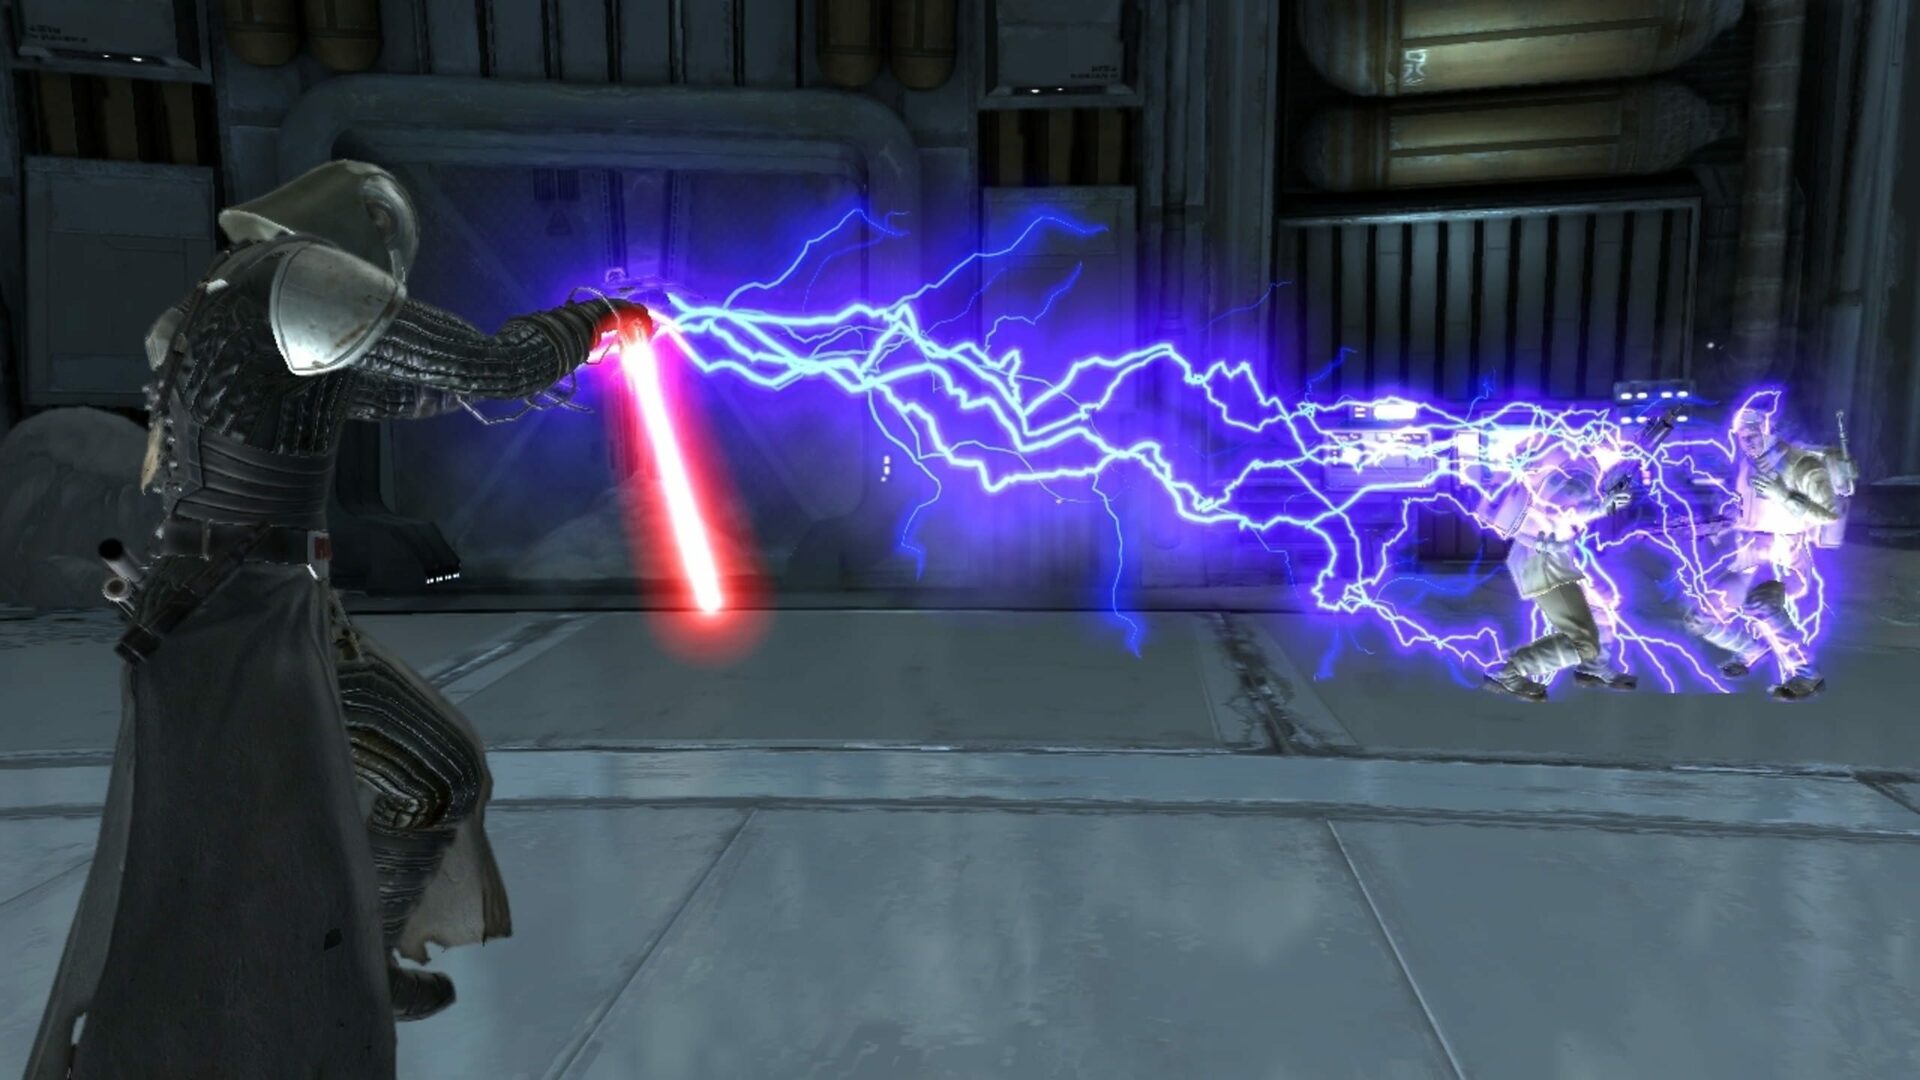 Tradução Star Wars The Force Unleashed: Ultimate Sith Edition PT